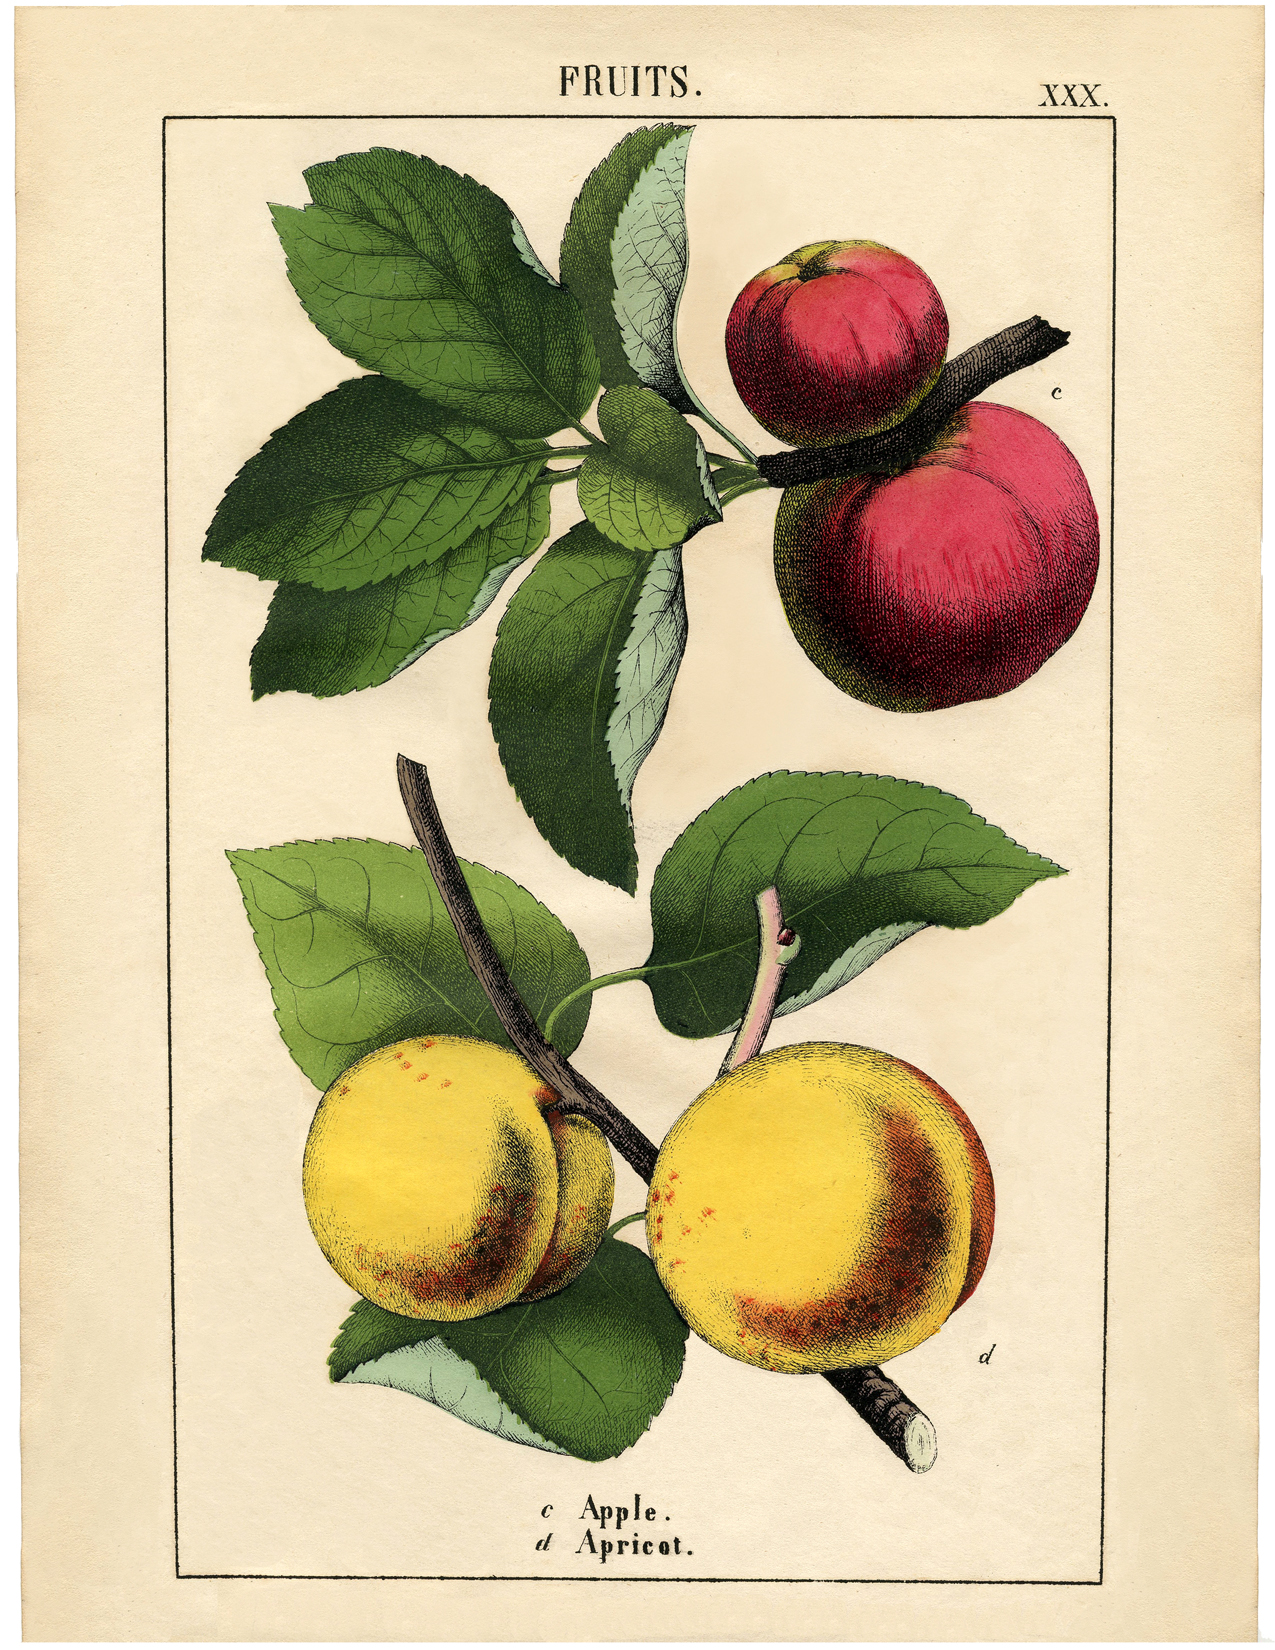 Vintage Botanical Fruit Download - Apples and Apricot - The Graphics Fairy